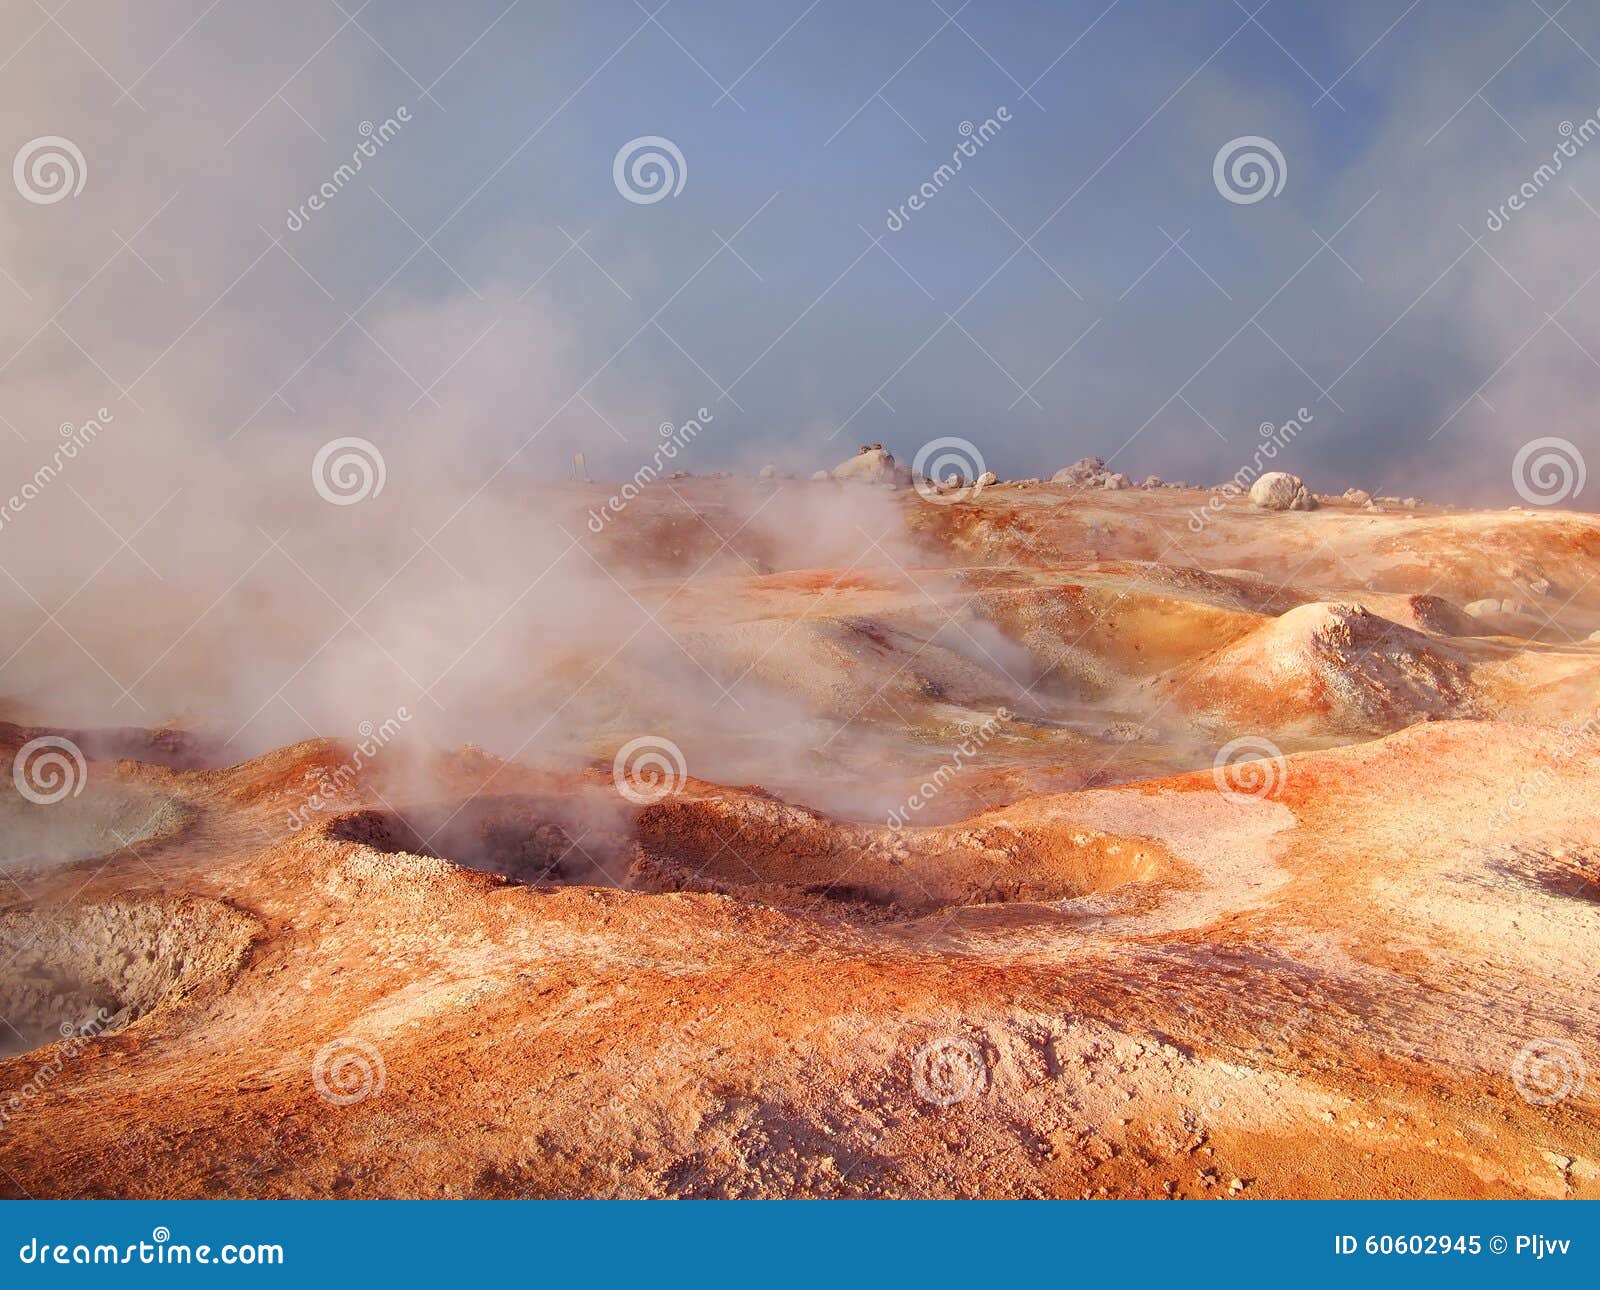 Landscape the Red Planet Mars Stock Image - Image of earth, 60602945